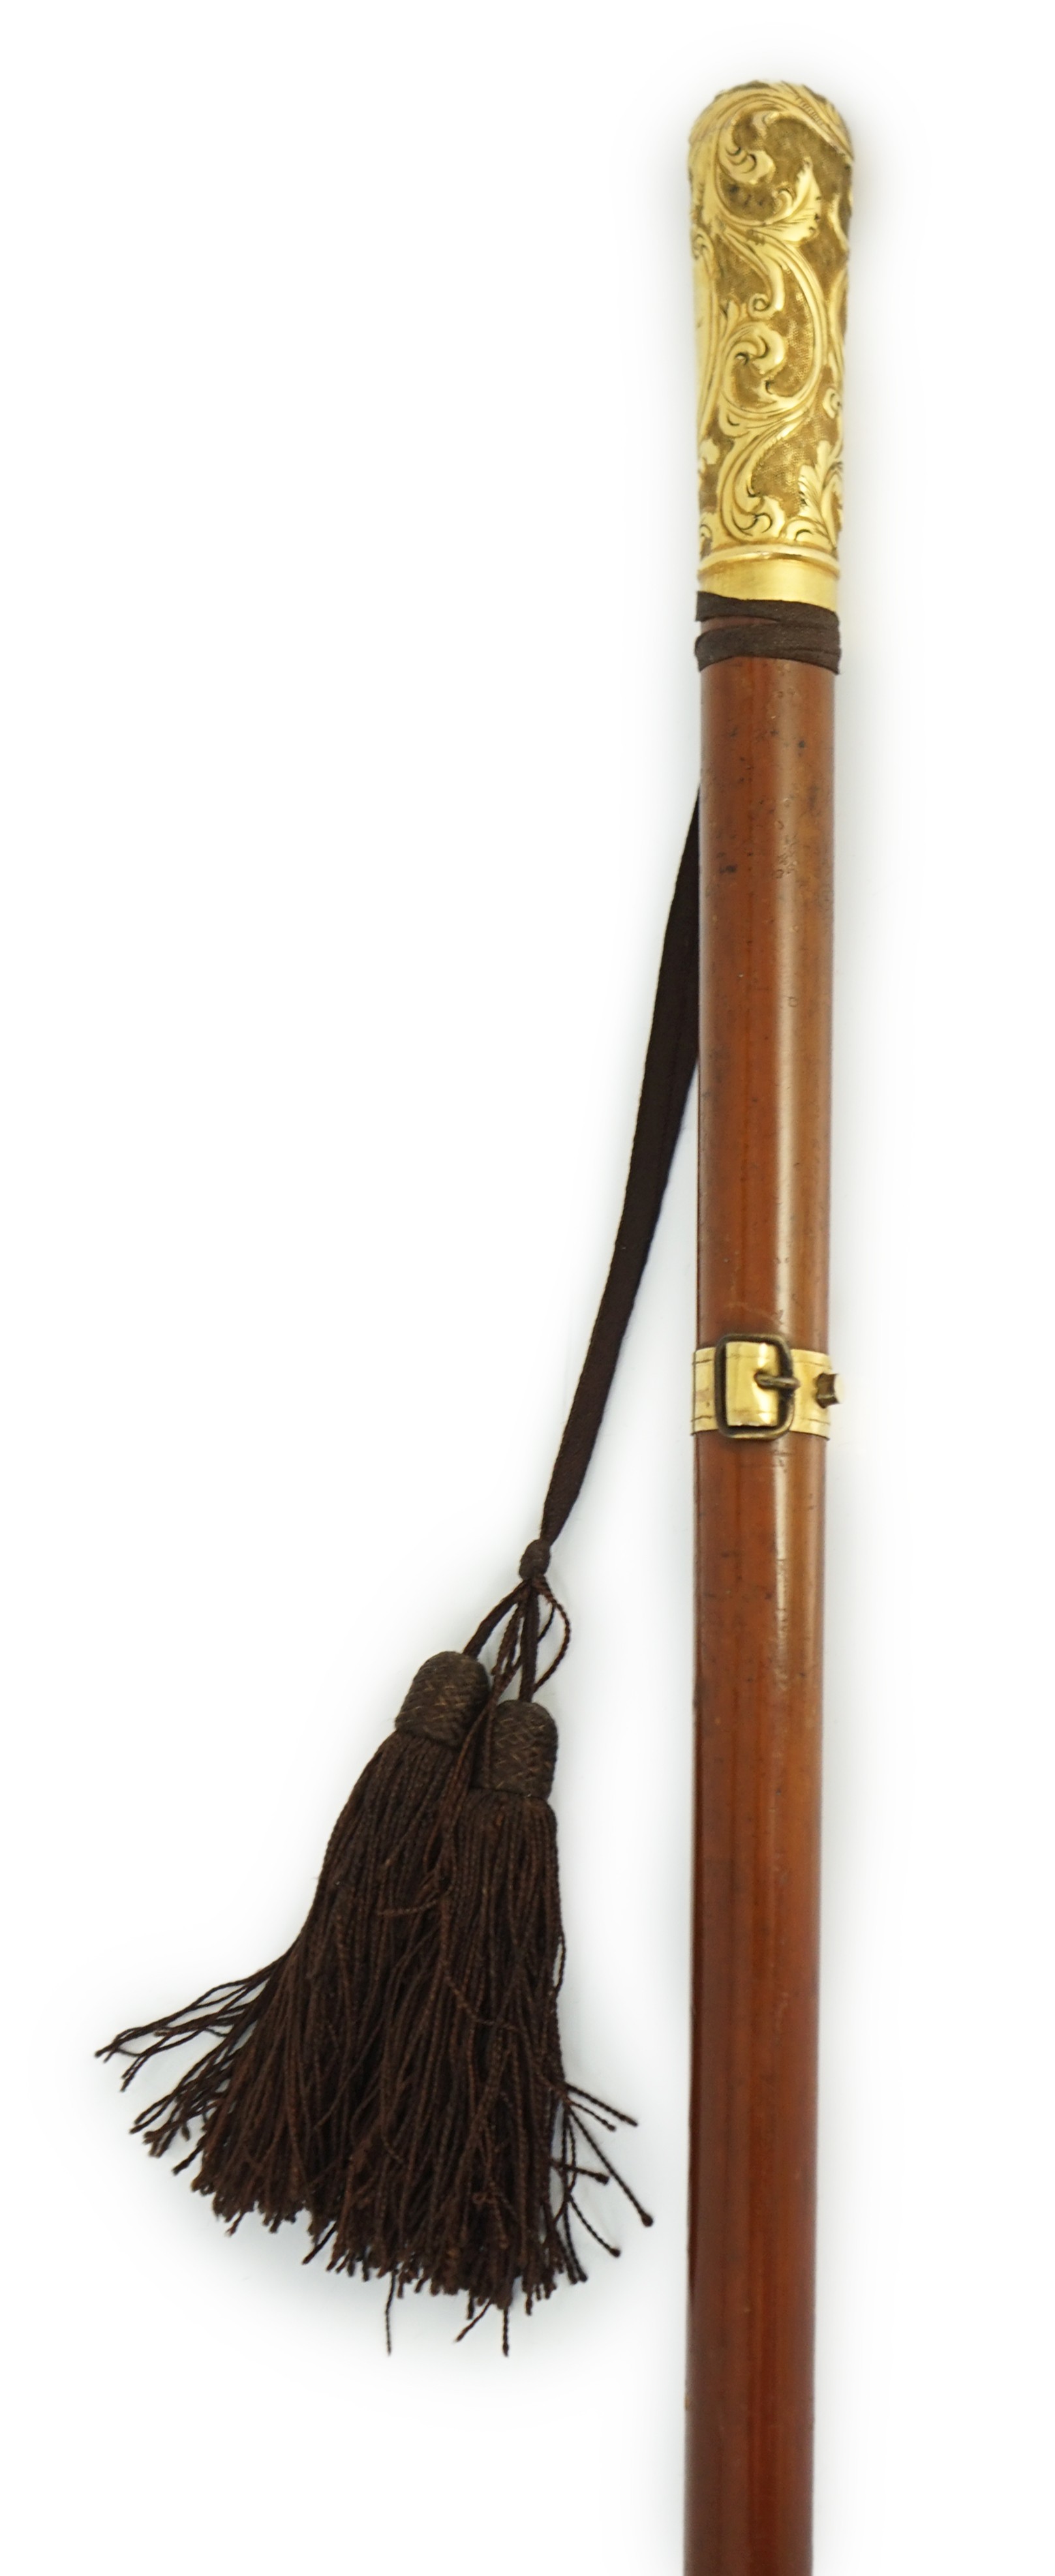 A 19th century French gold mounted hardwood swordstick, 86cm long                                                                                                                                                           